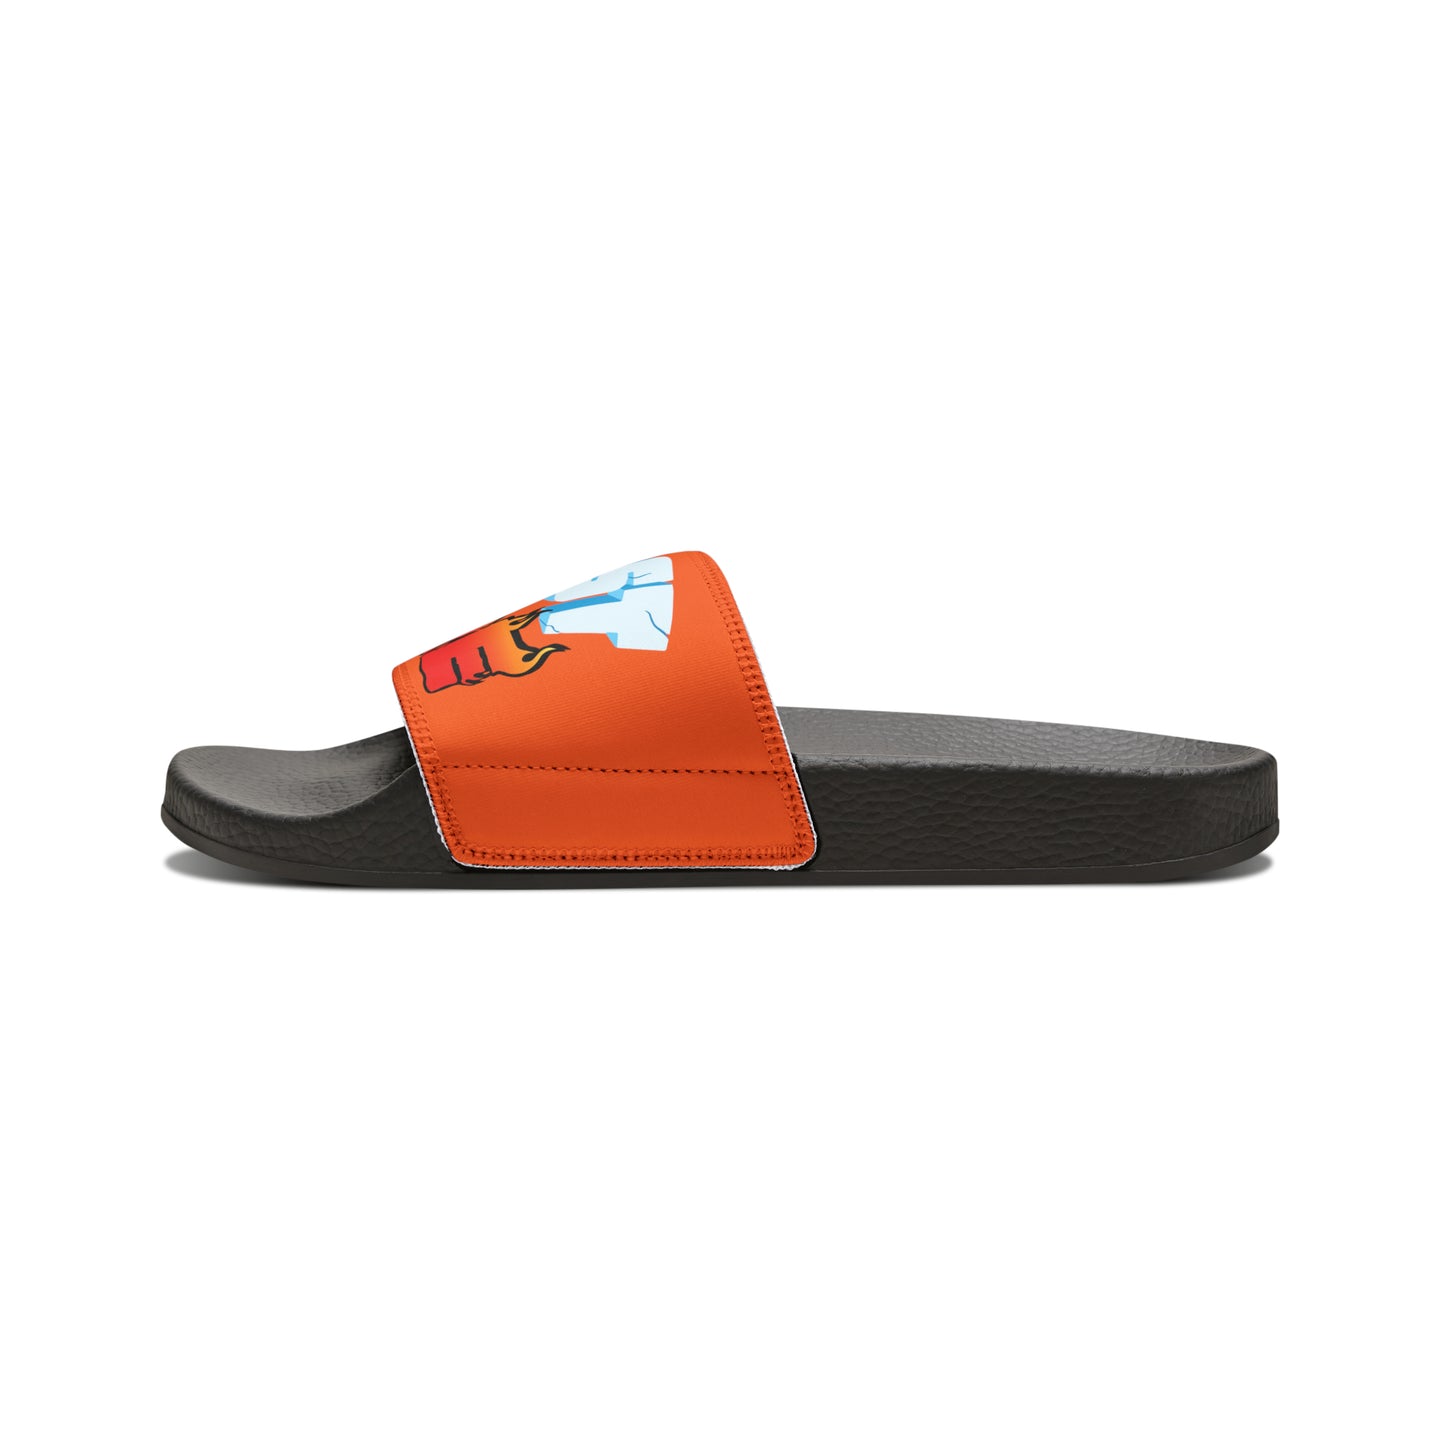 Frost n Fire Slides ( Limited Edition )